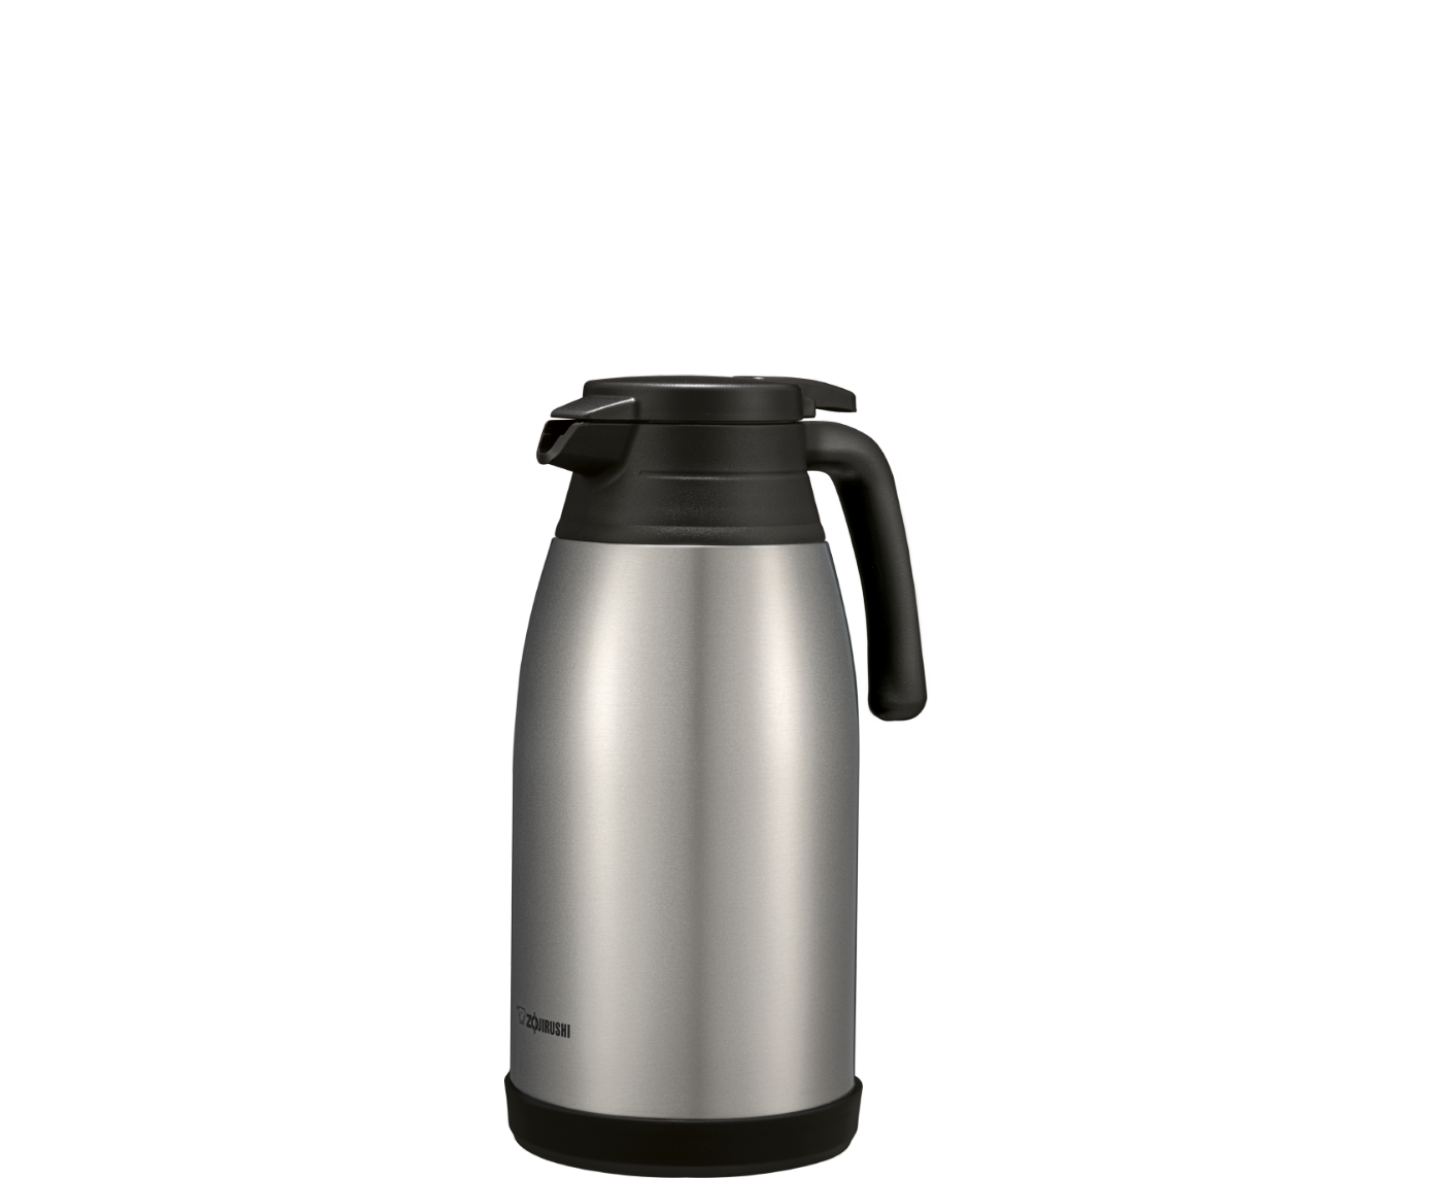 SteelVac® Essential Carafes, Vacuum Insulated Carafe, 2% Milk, Stainless  Vacuum, Push Button, 1.5 Liter, Brushed Stainless and Black